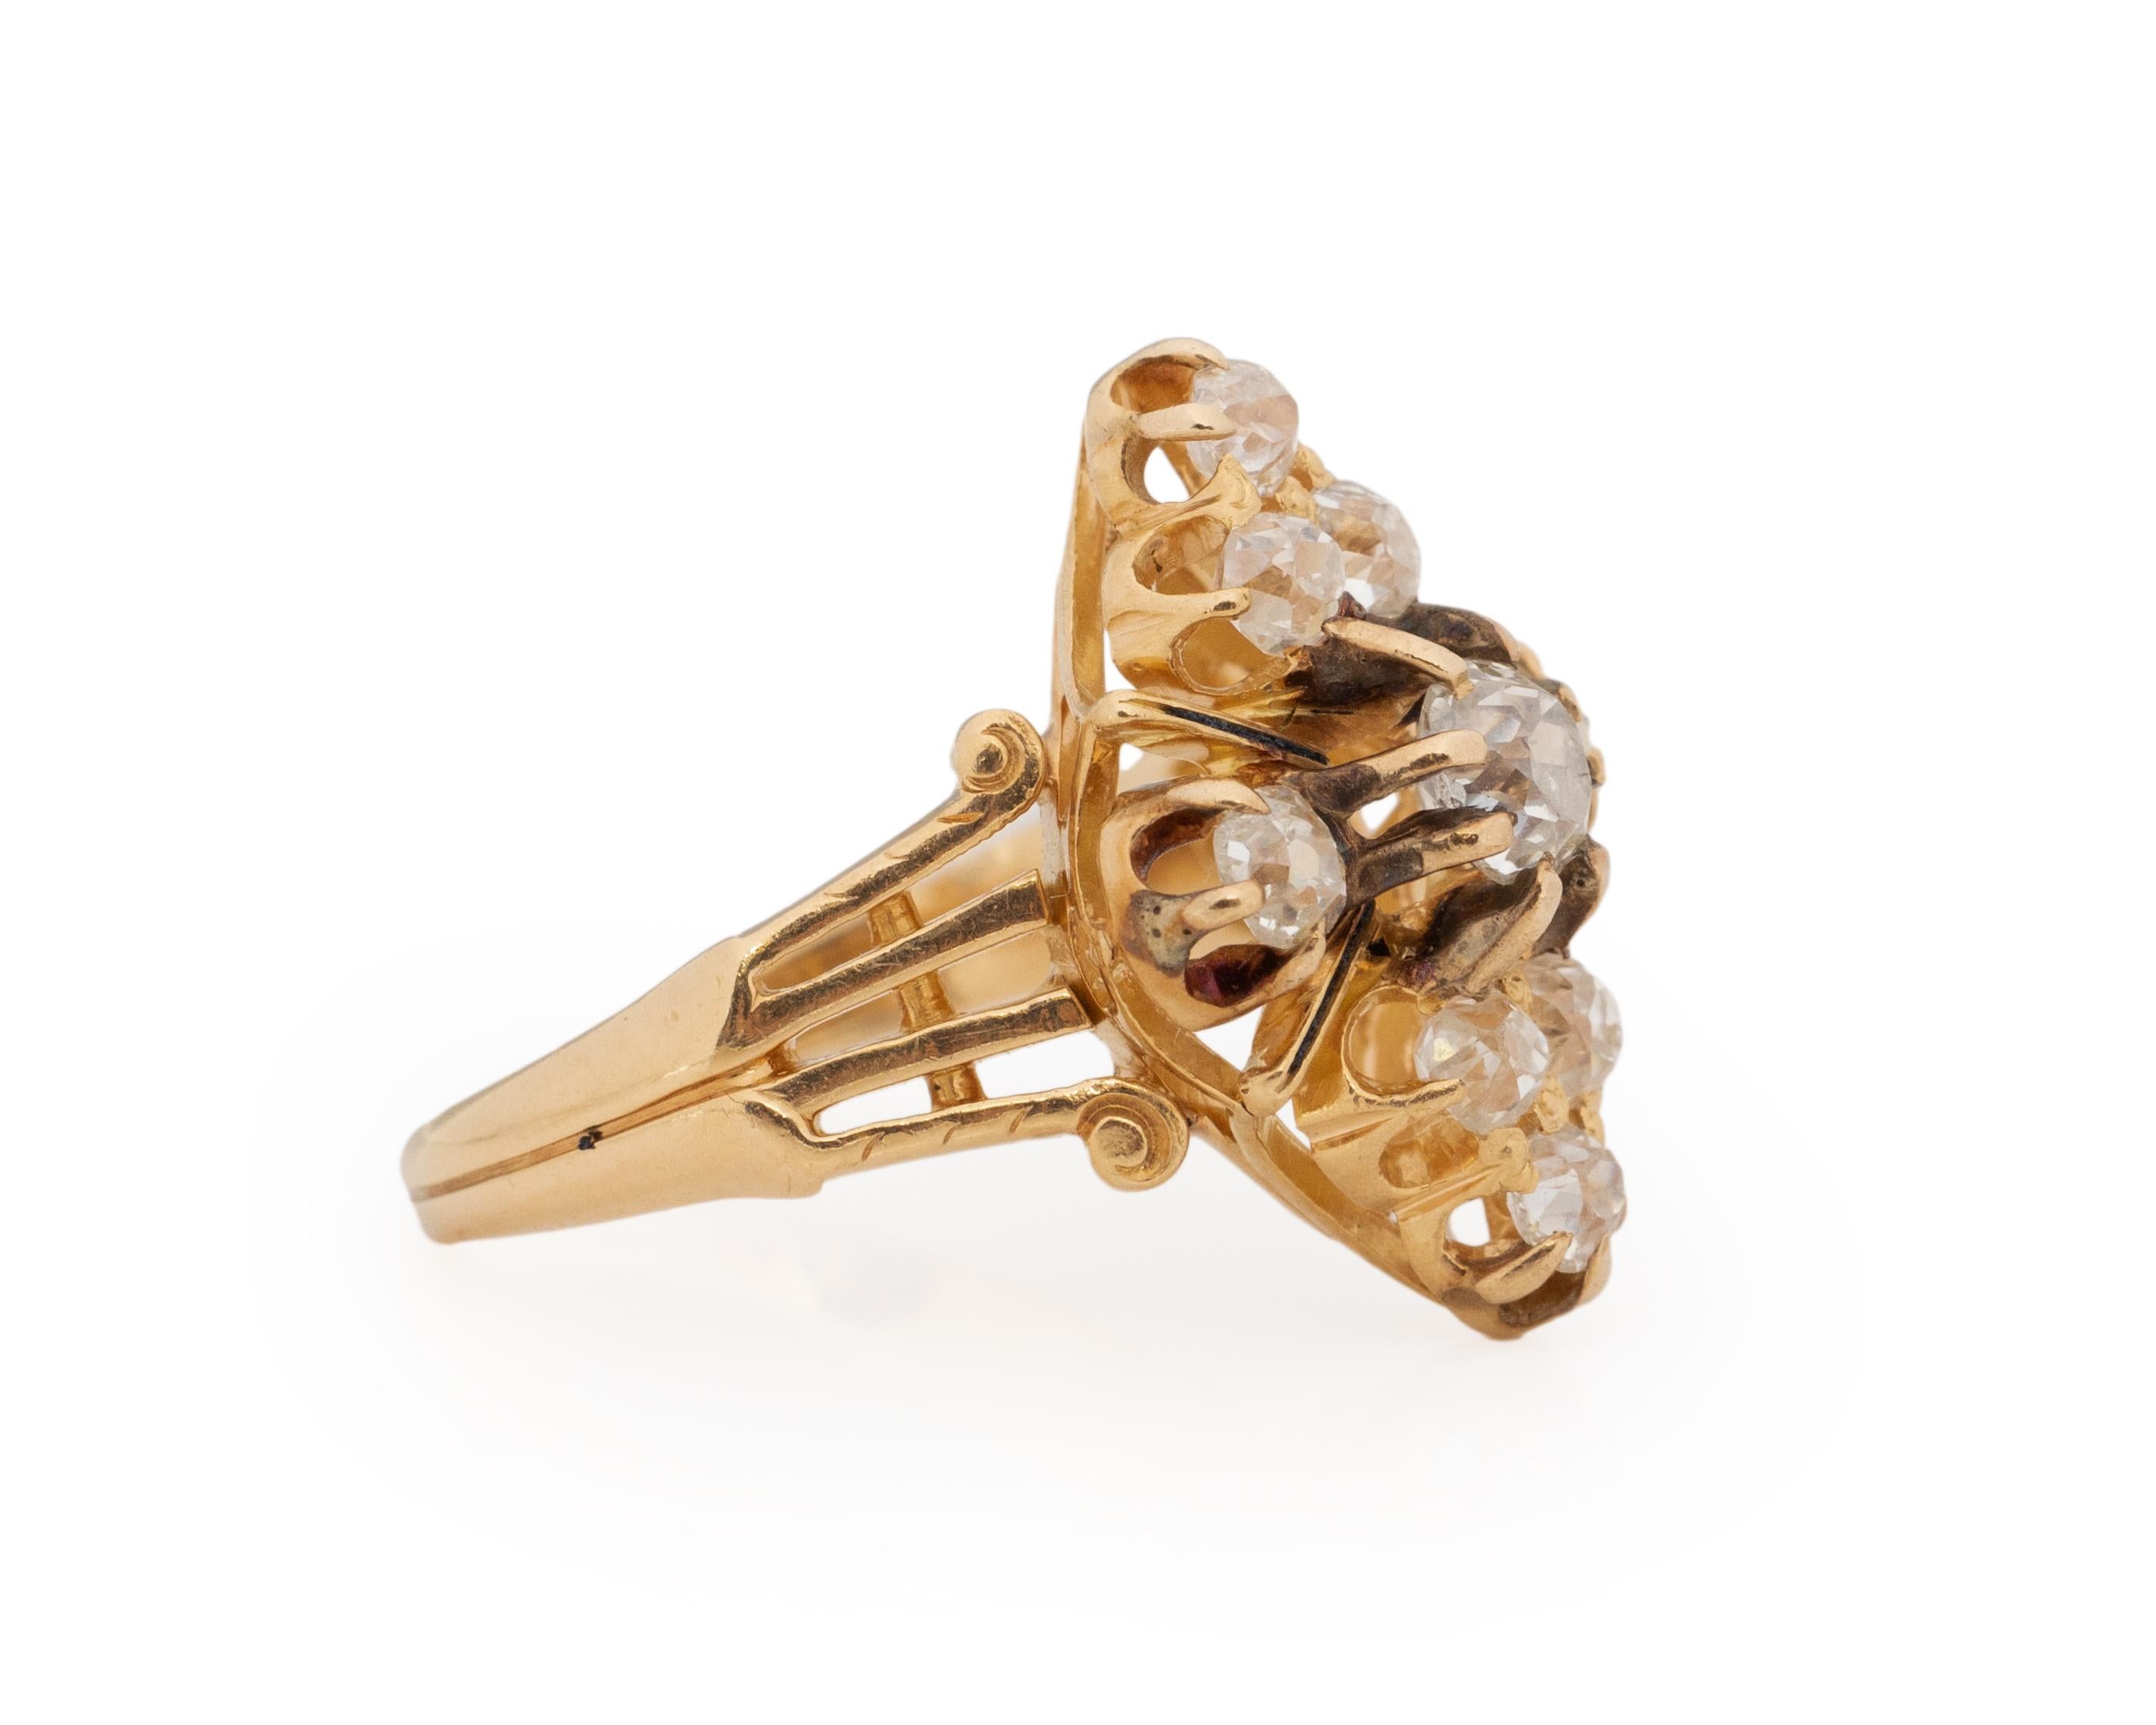 Ring Size: 5.75
Metal Type: 14k Yellow Gold [Hallmarked, and Tested]
Weight: 3.5 grams

Diamond Details:
Weight: 1.05ct, total weight
Cut: Old European brilliant
Color: 
Clarity: 
Measurements: mm

Finger to Top of Stone Measurement: 6mm
Condition: